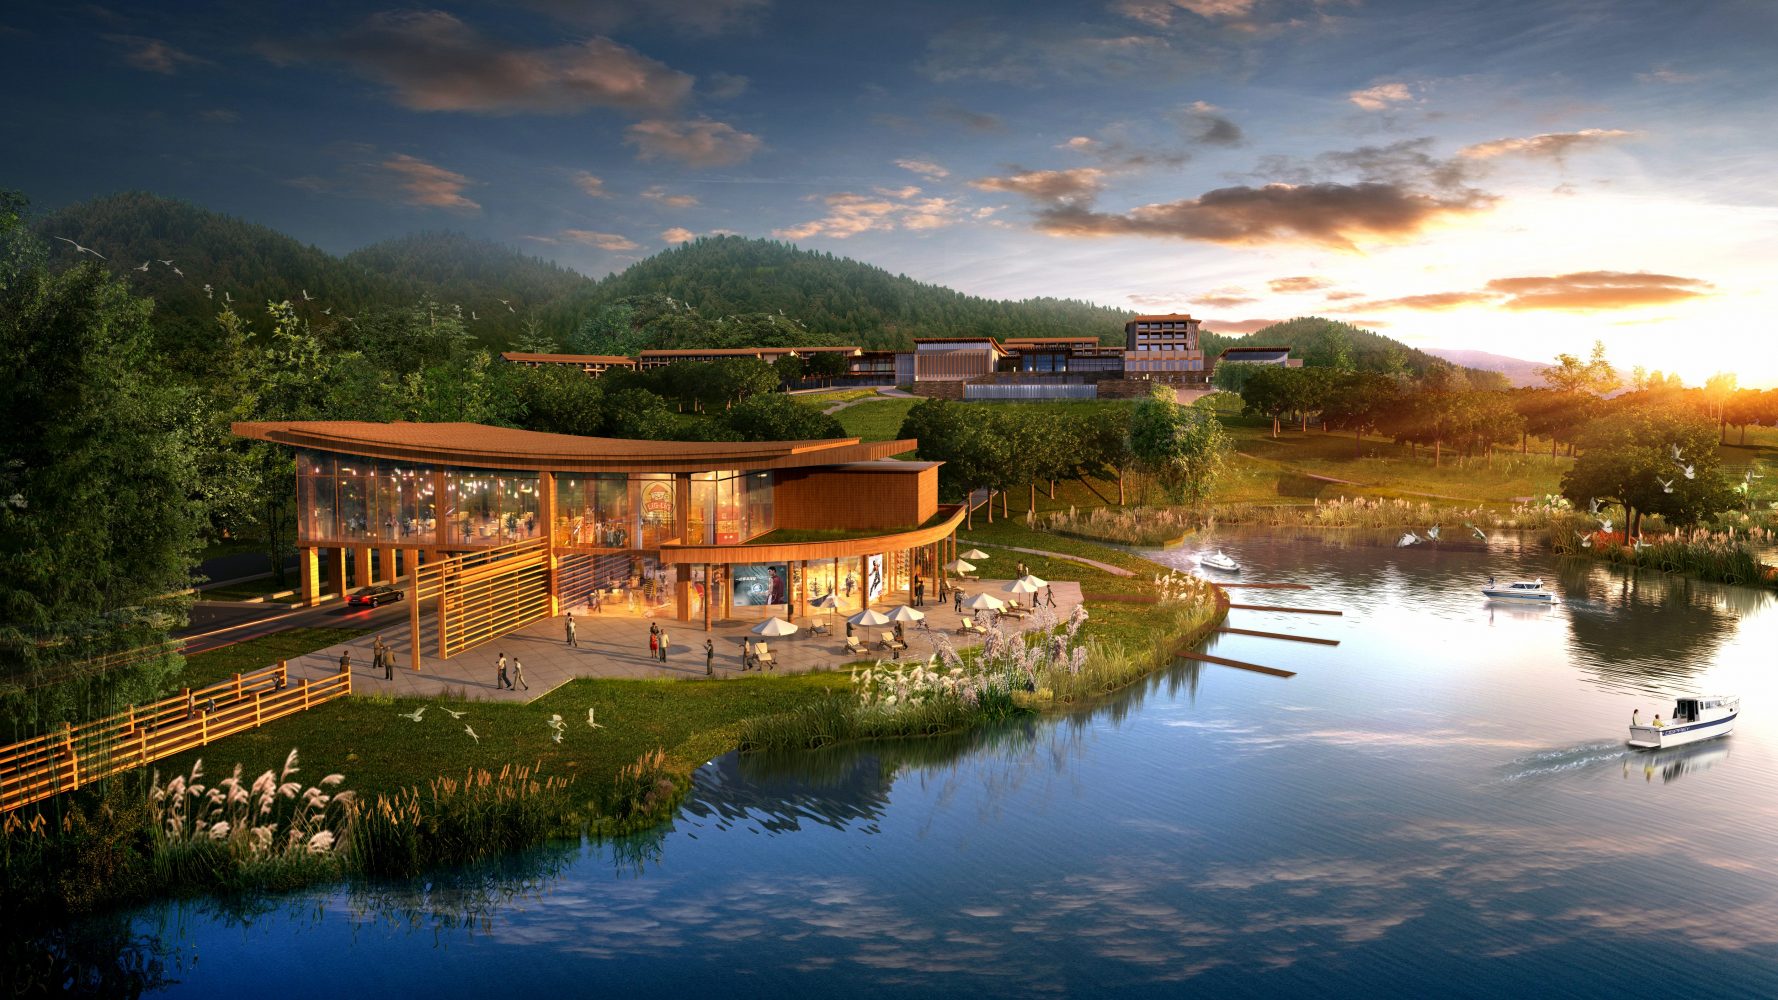 CLUB MED RESORT ANJI, by archilier architecture